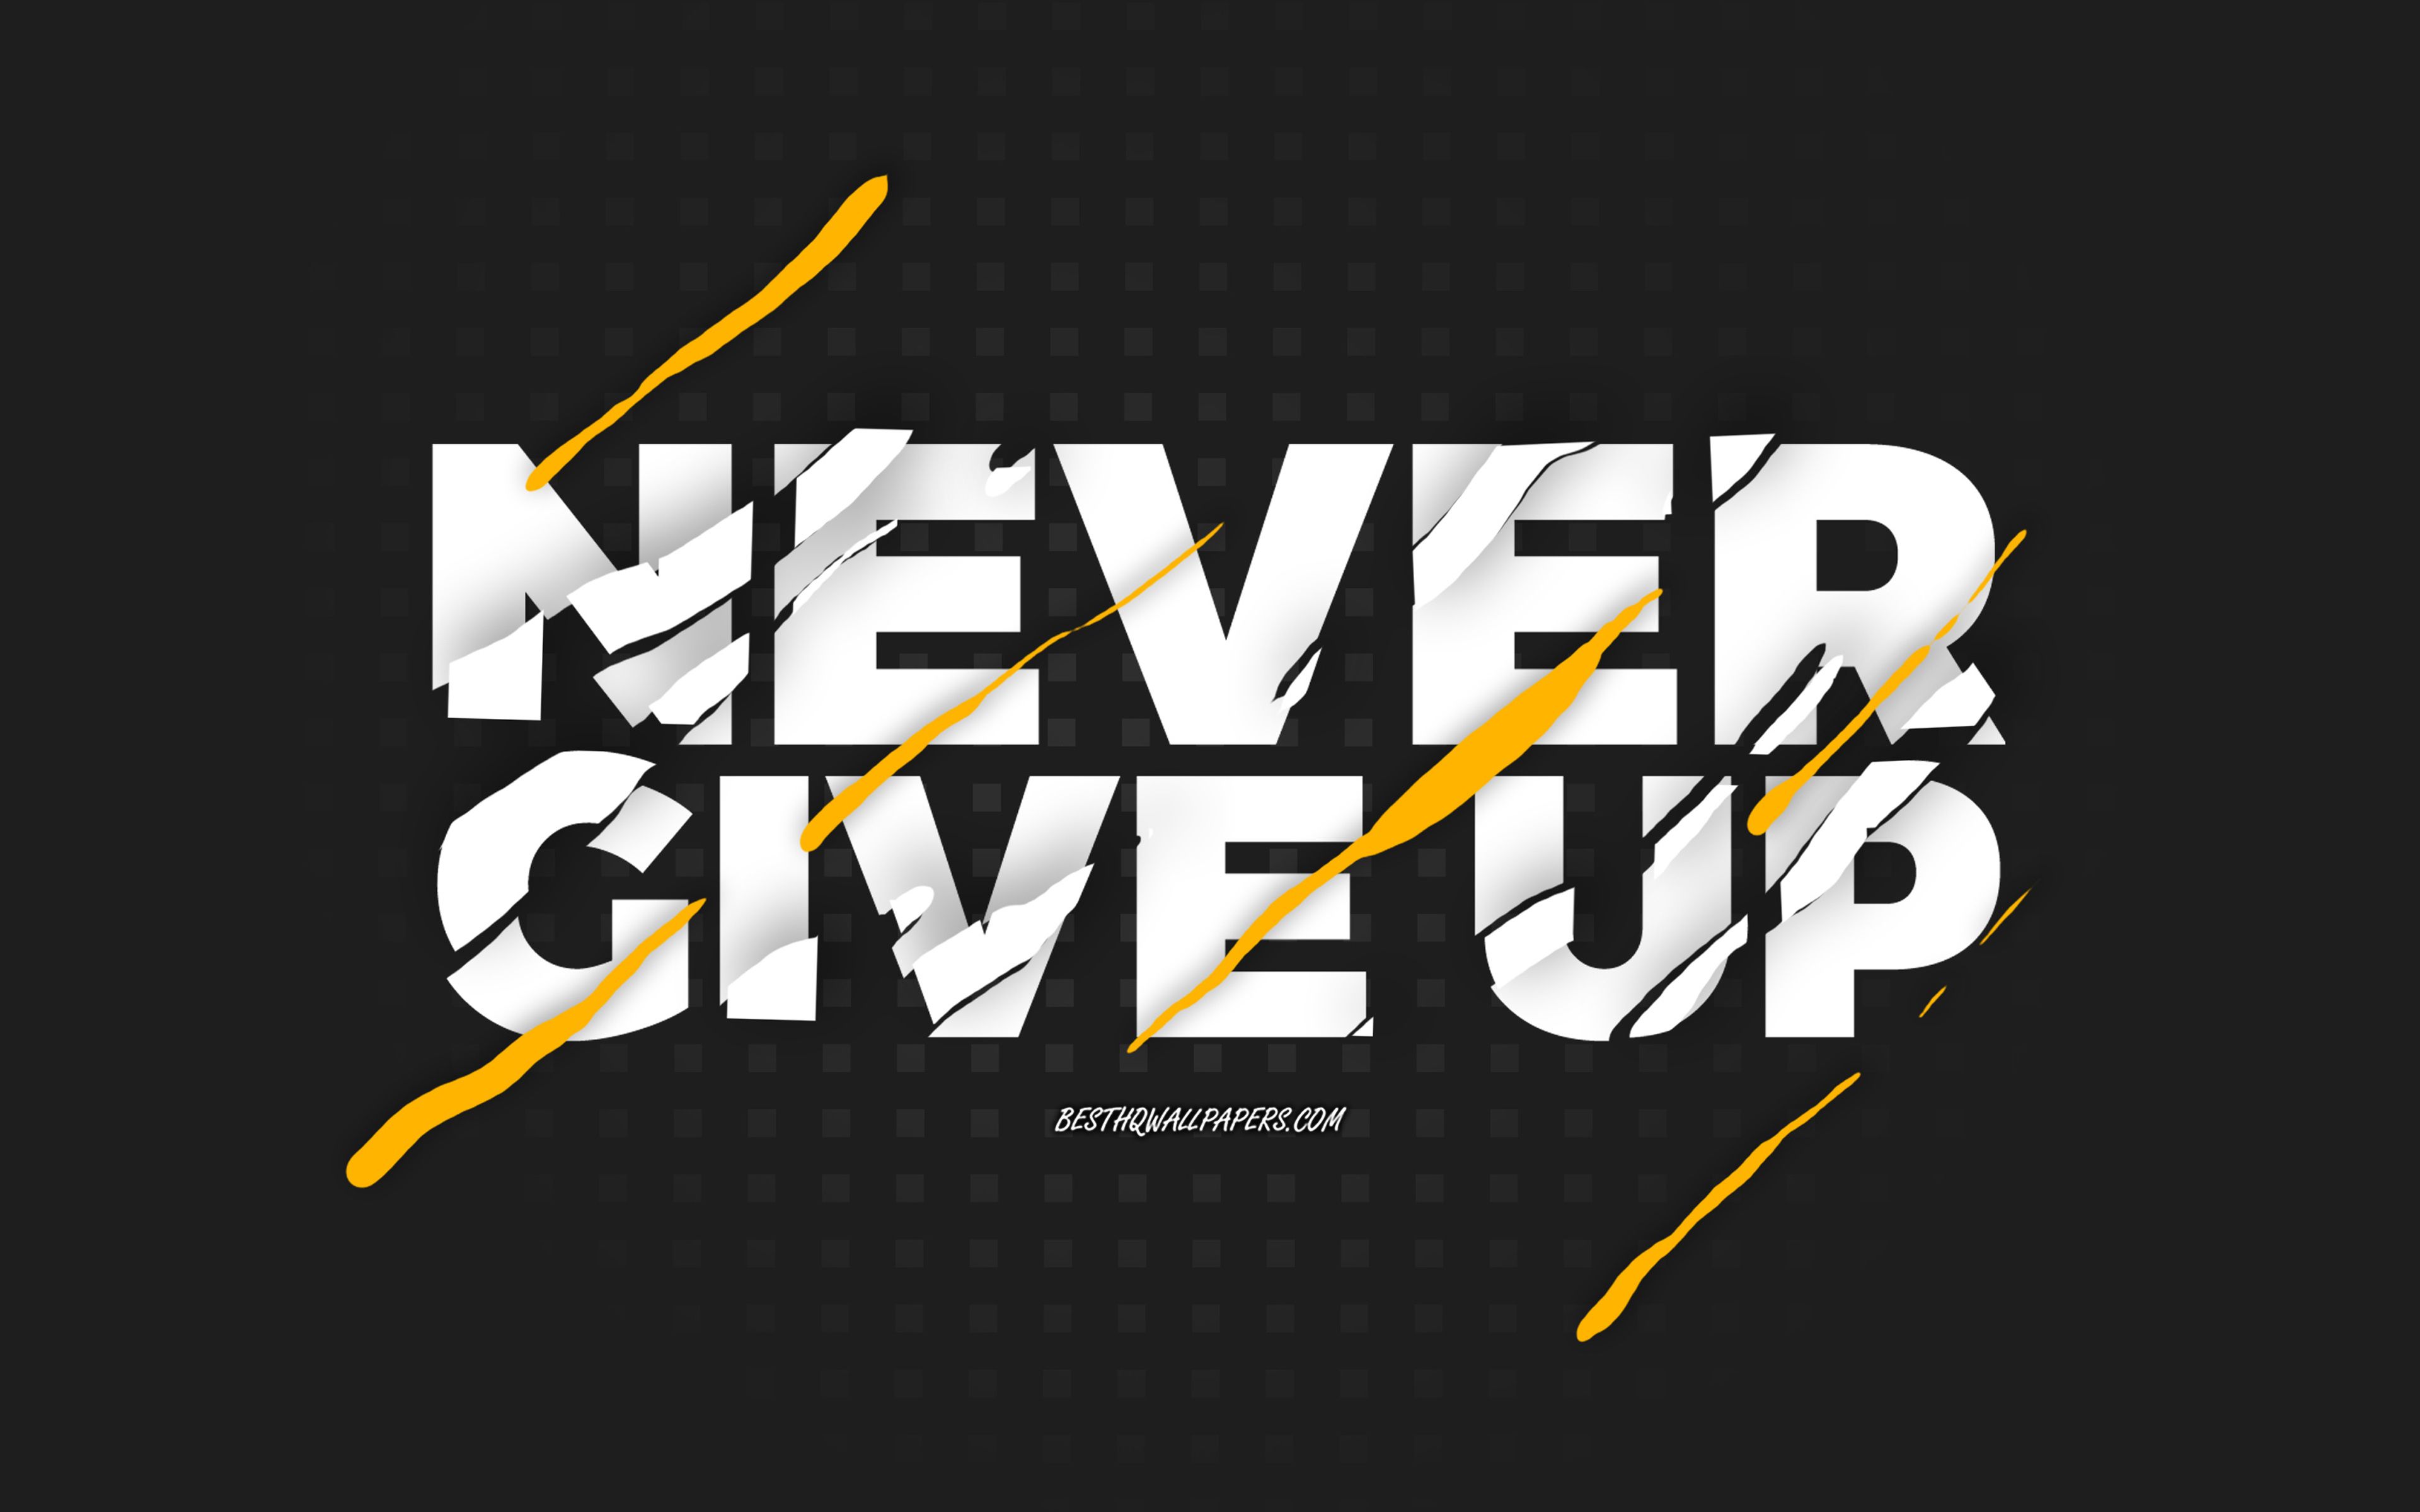 Never Give Up Wallpapers